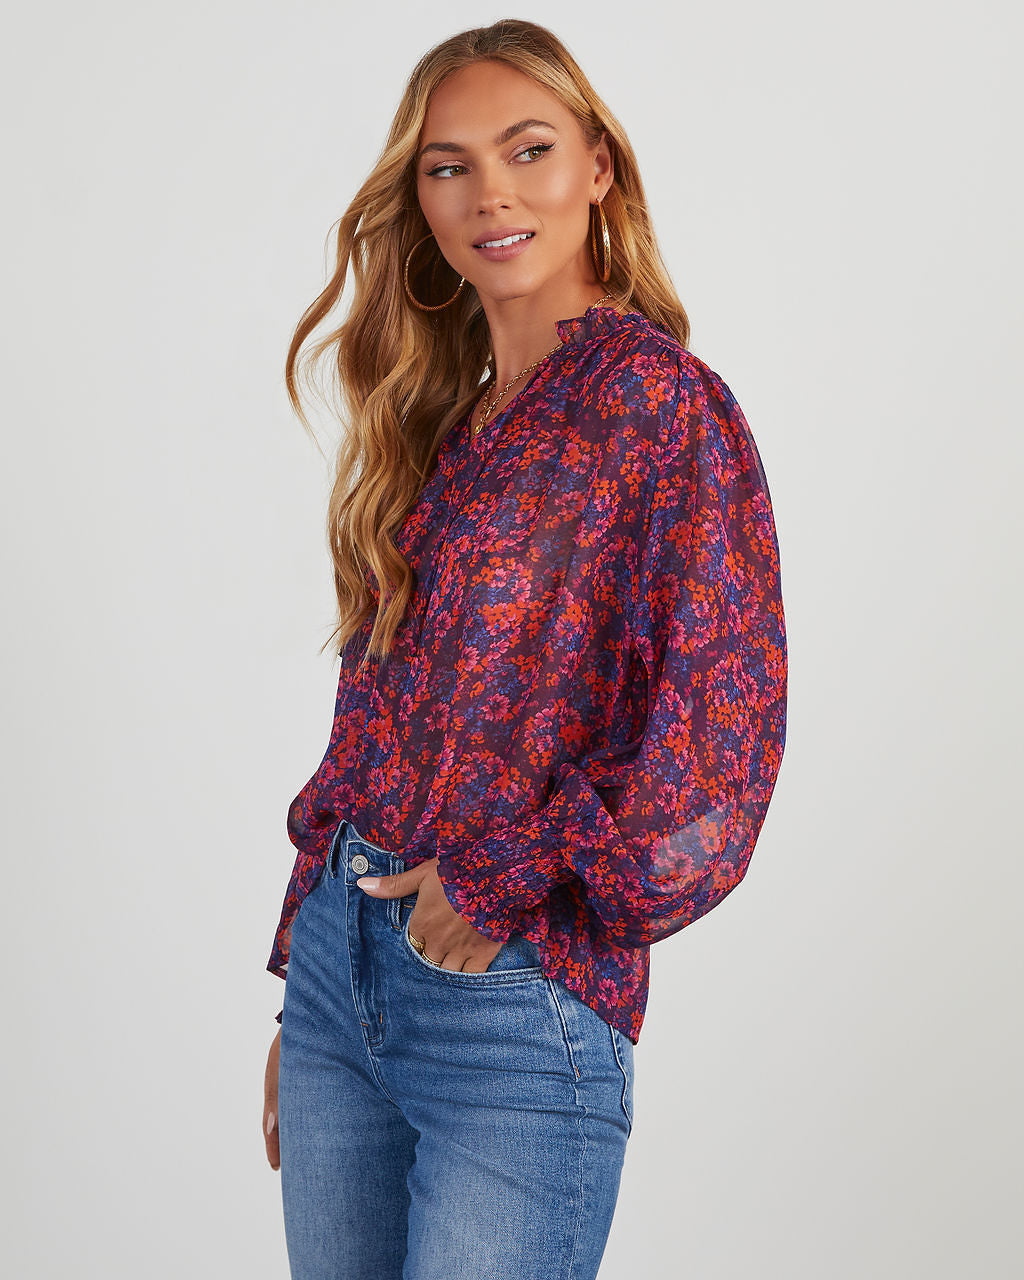 Chase The Feeling Floral Blouse – VICI